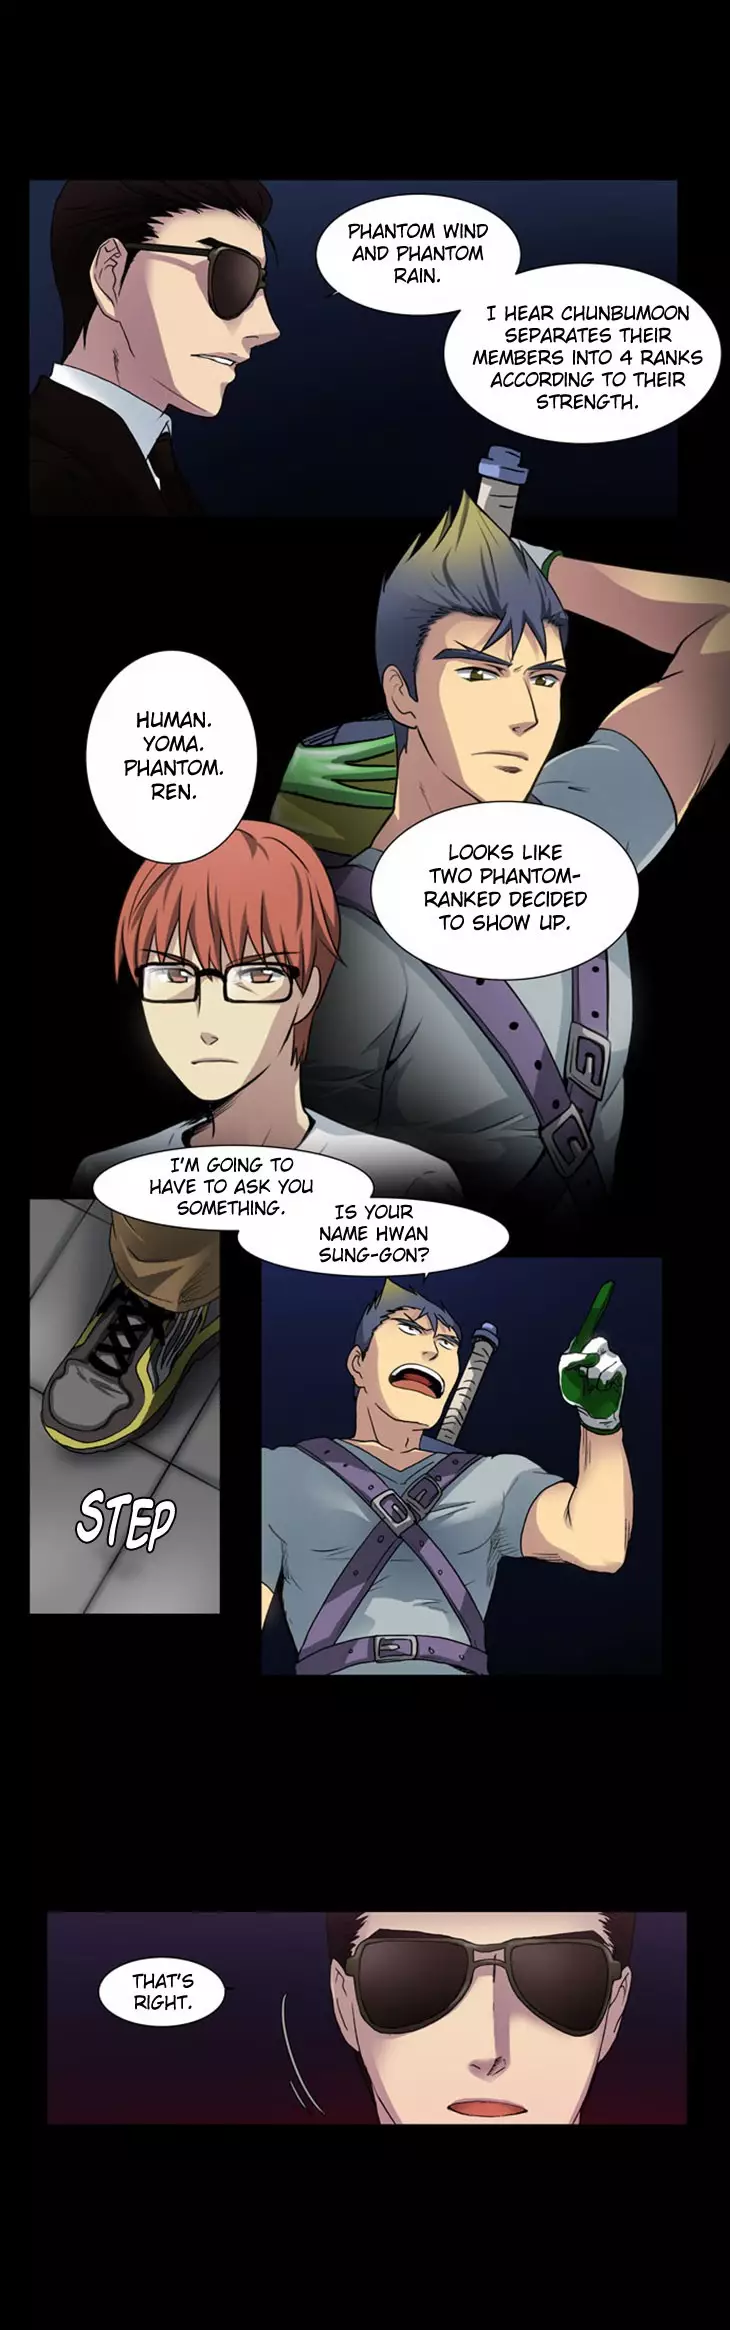 The Gamer - 9 page p_00011